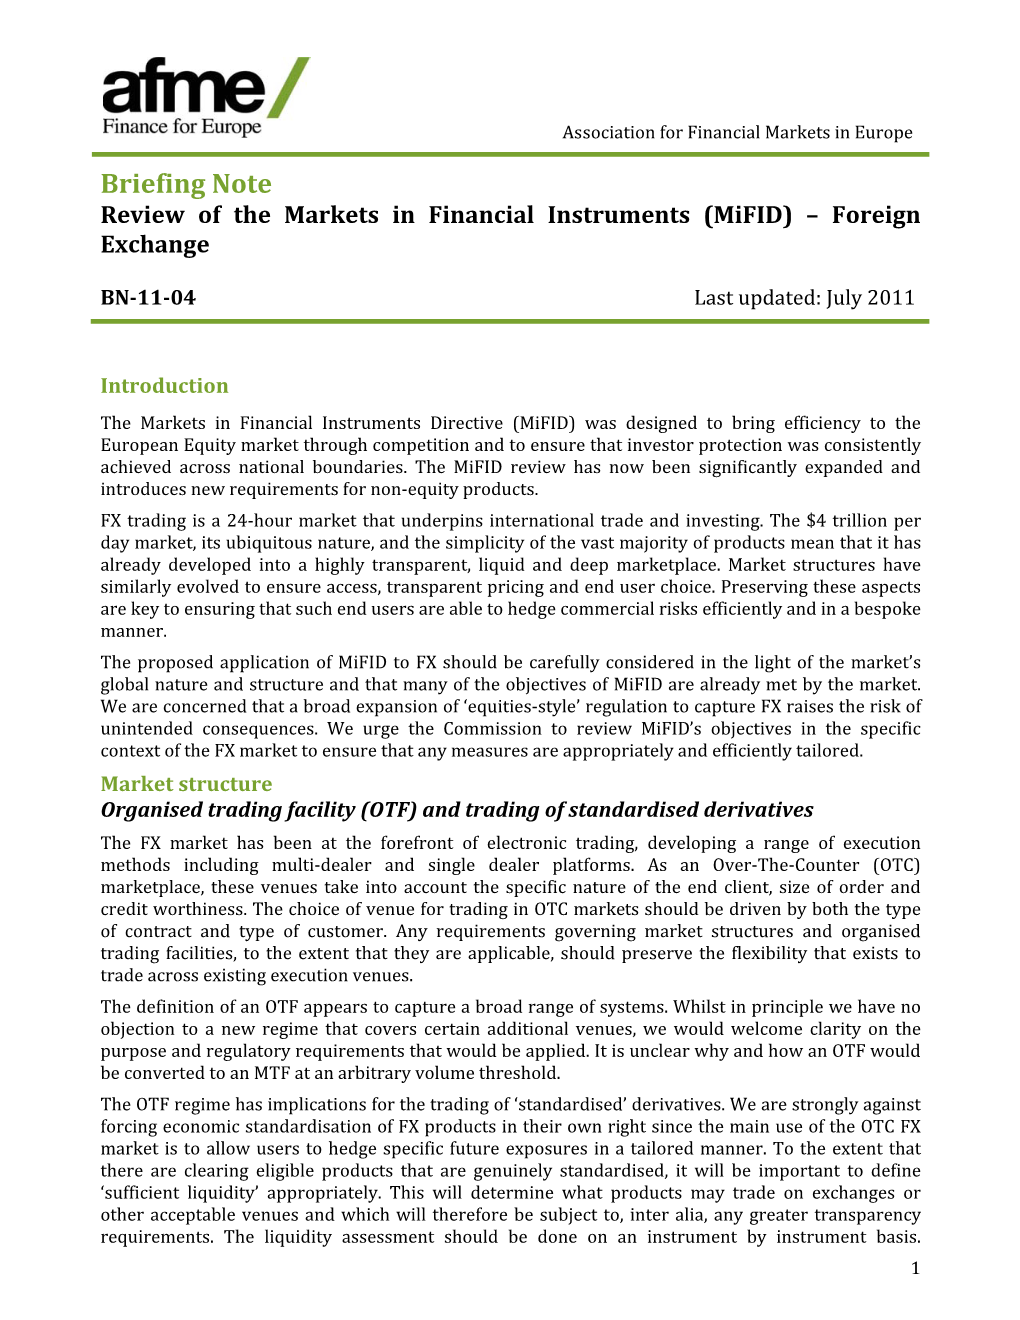 Briefing Note Review of the Markets in Financial Instruments (Mifid) – Foreign Exchange